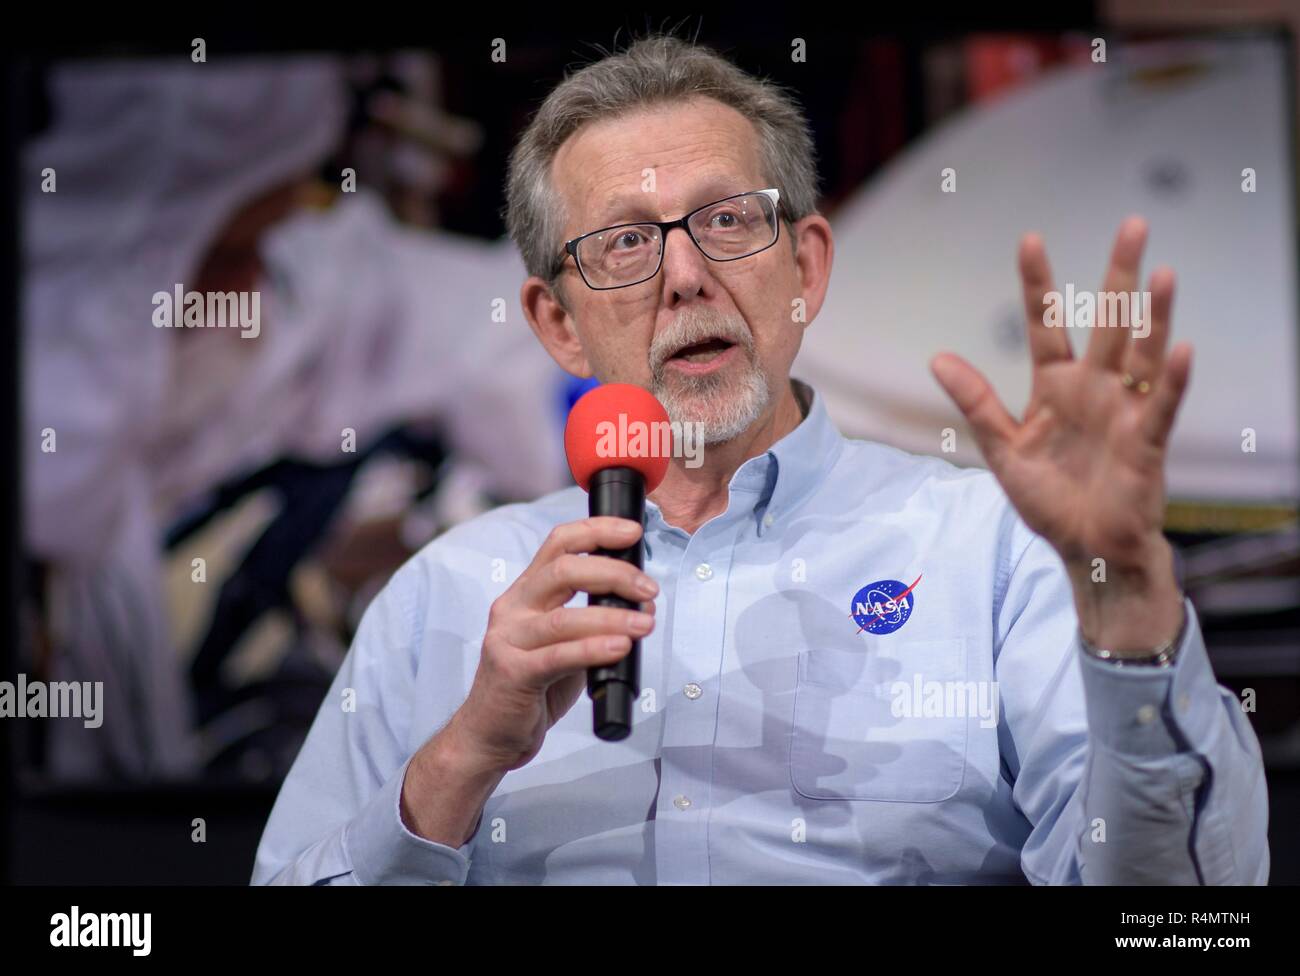 NASA Chief Scientist Jim Green, talks about Mars InSight during a social media briefing inside the Mission Support Area of the Jet Propulsion Laboratory November 25, 2018 in Pasadena, California. InSight, is a Mars lander designed to study the inner space of Mars and is scheduled to touch down on the Red Planet November 26th. Stock Photo